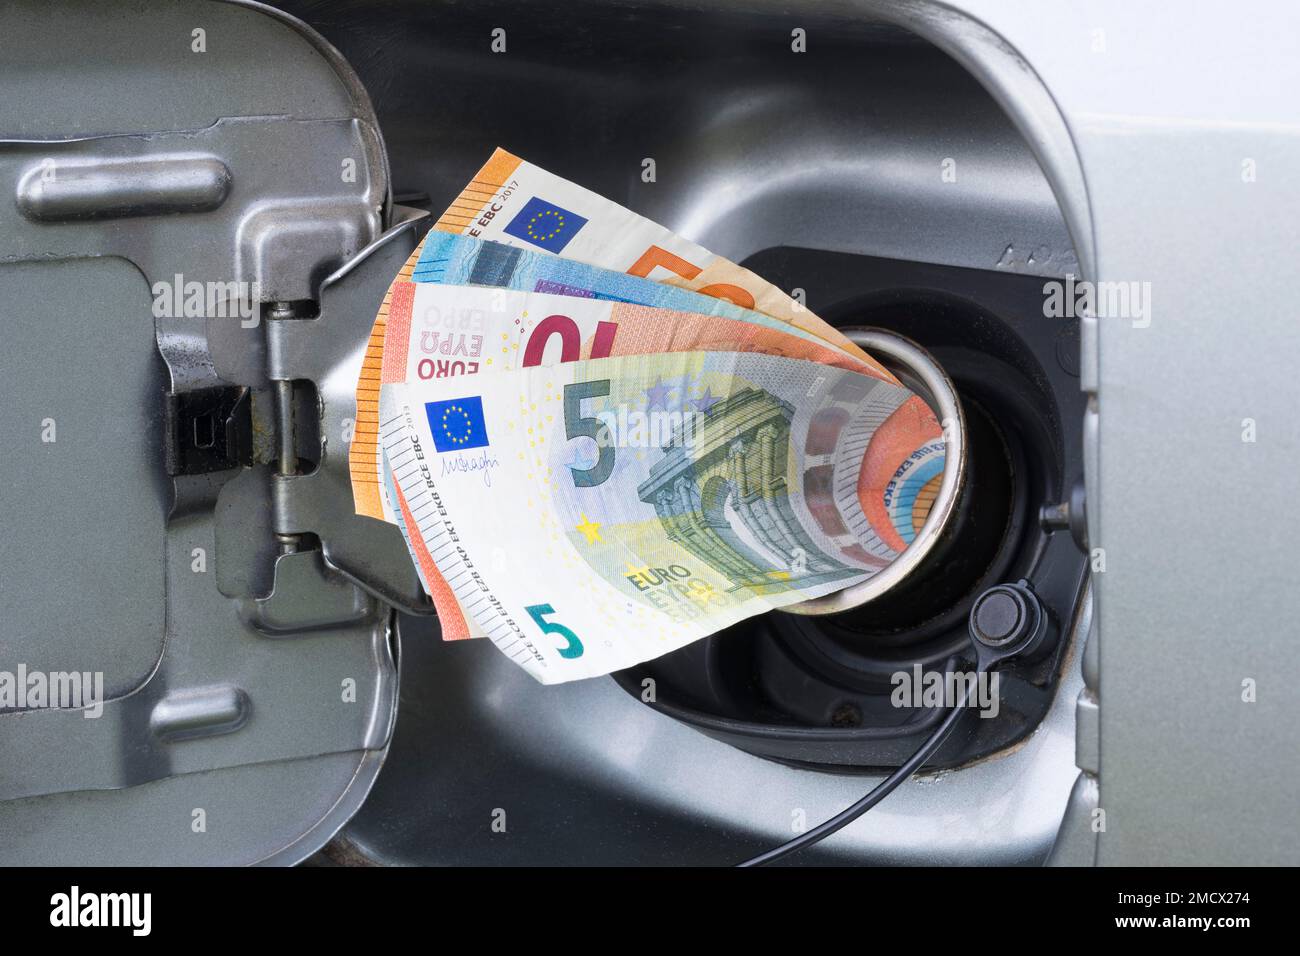 Symbolic image, expensive fuel price, fuel filler neck, car, diesel, petrol, banknotes, euro, Germany Stock Photo